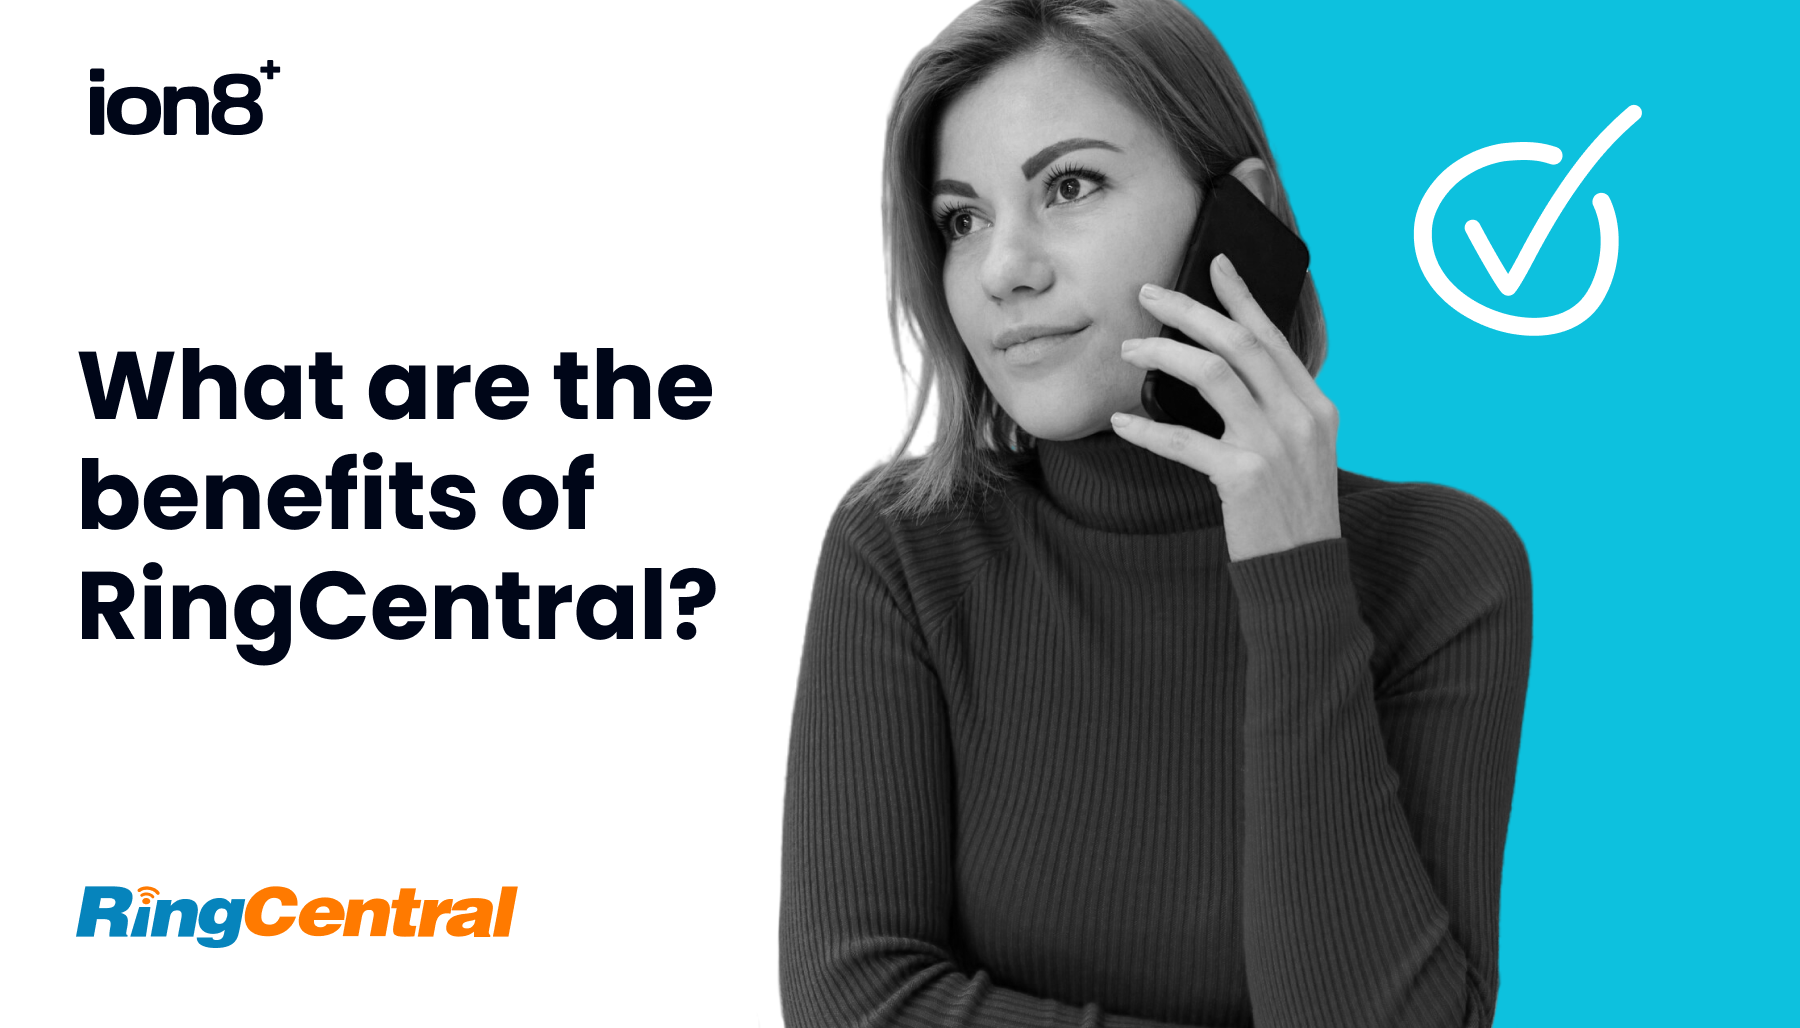 What are the benefits of RingCentral?